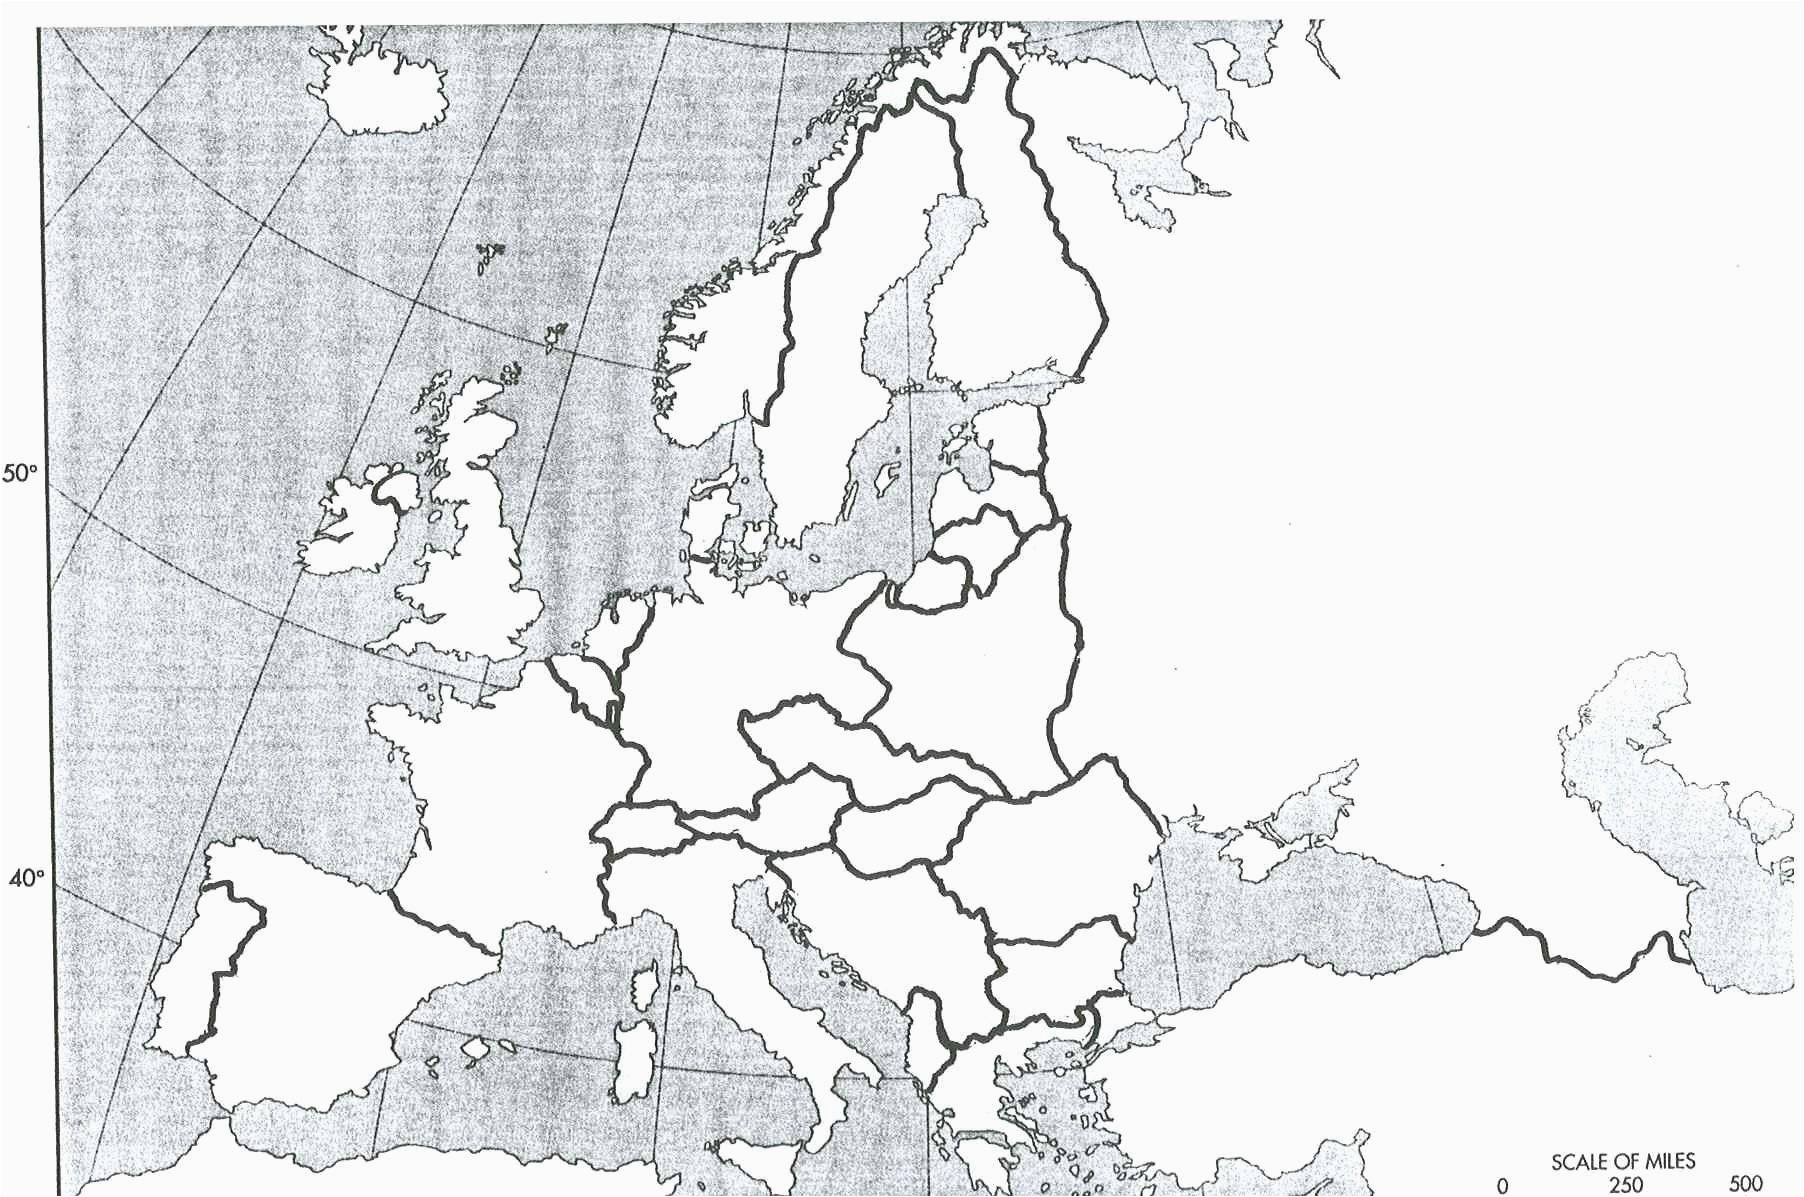 Printable Map Europe Beautiful Maps The World Black And White Free Downloads Europe In World War